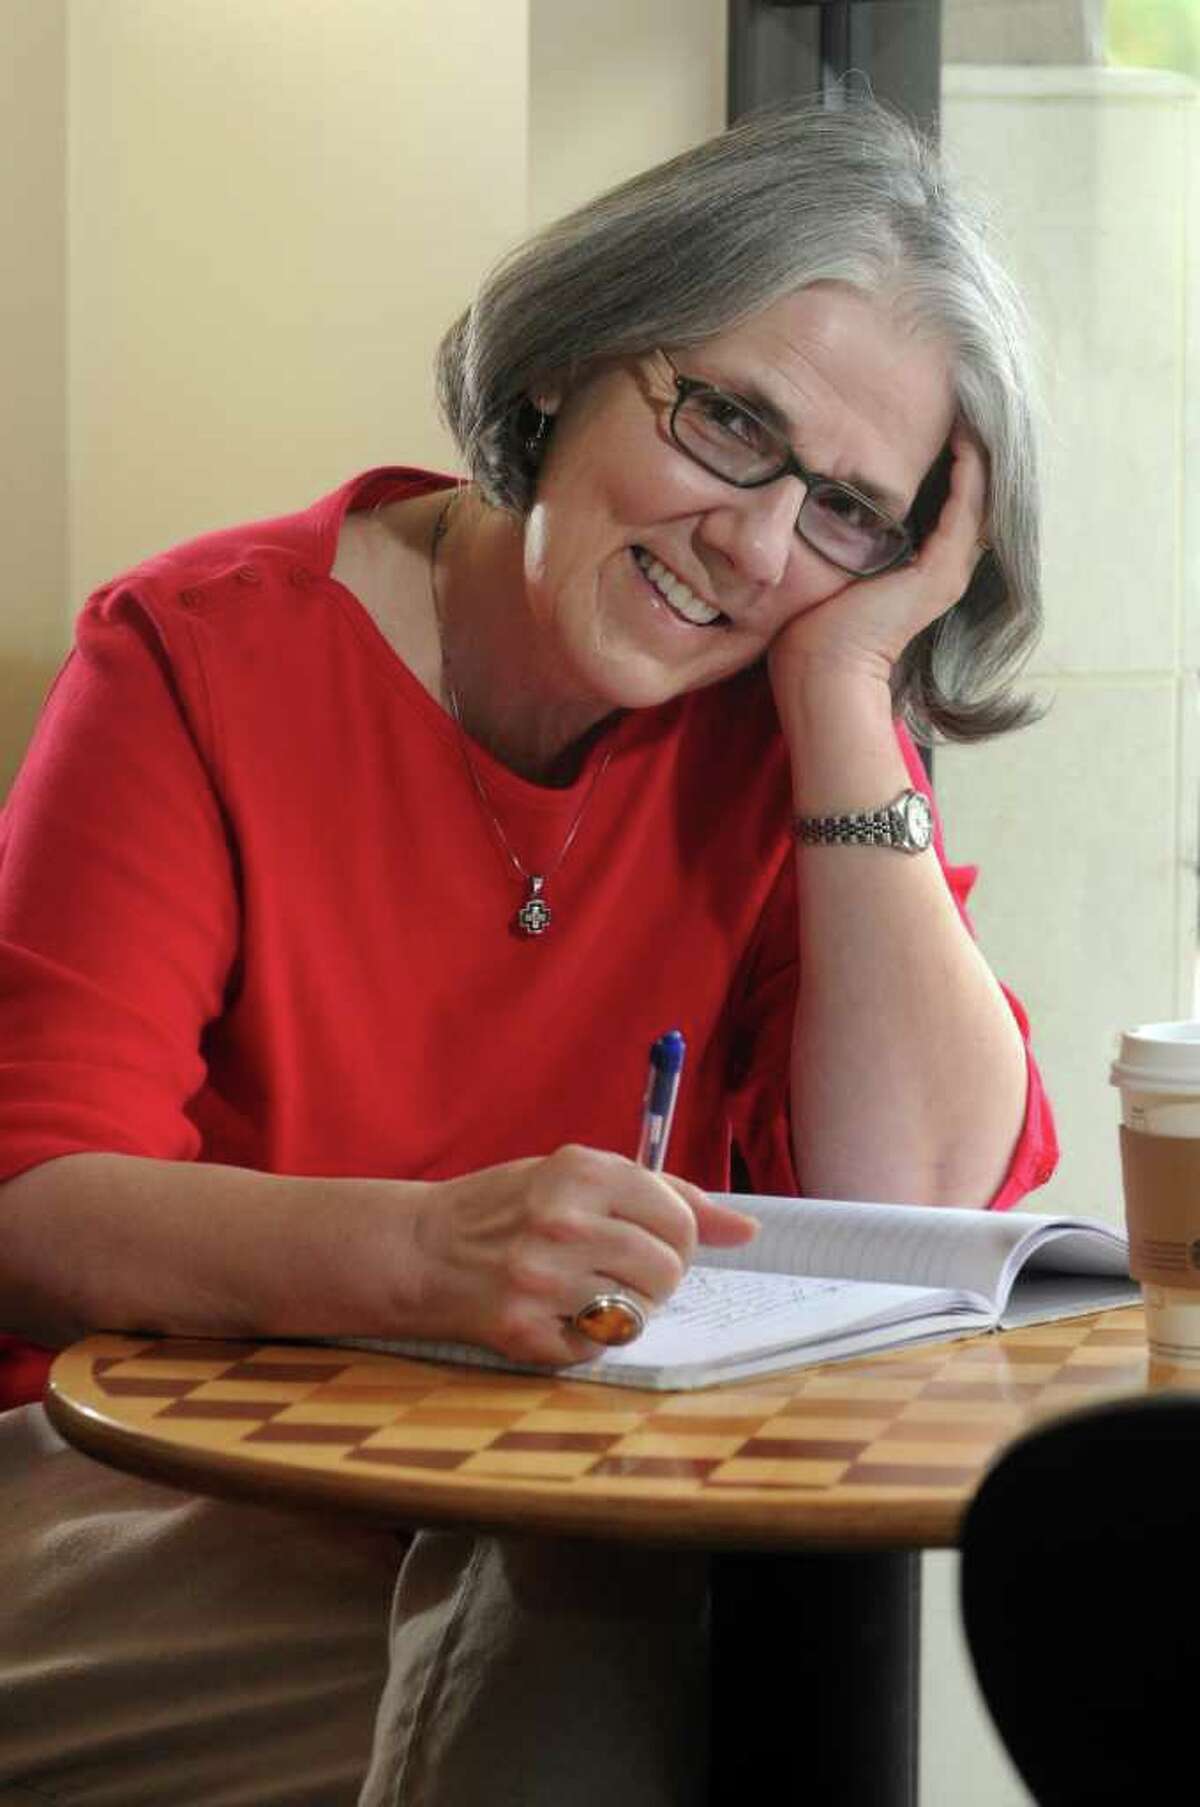 Carolyn Boyd, of The Woodlands, relaxes at Starbucks in the Pinecroft Shopping Center, where she writes most of her poetry. Freelance photo by Jerry Baker